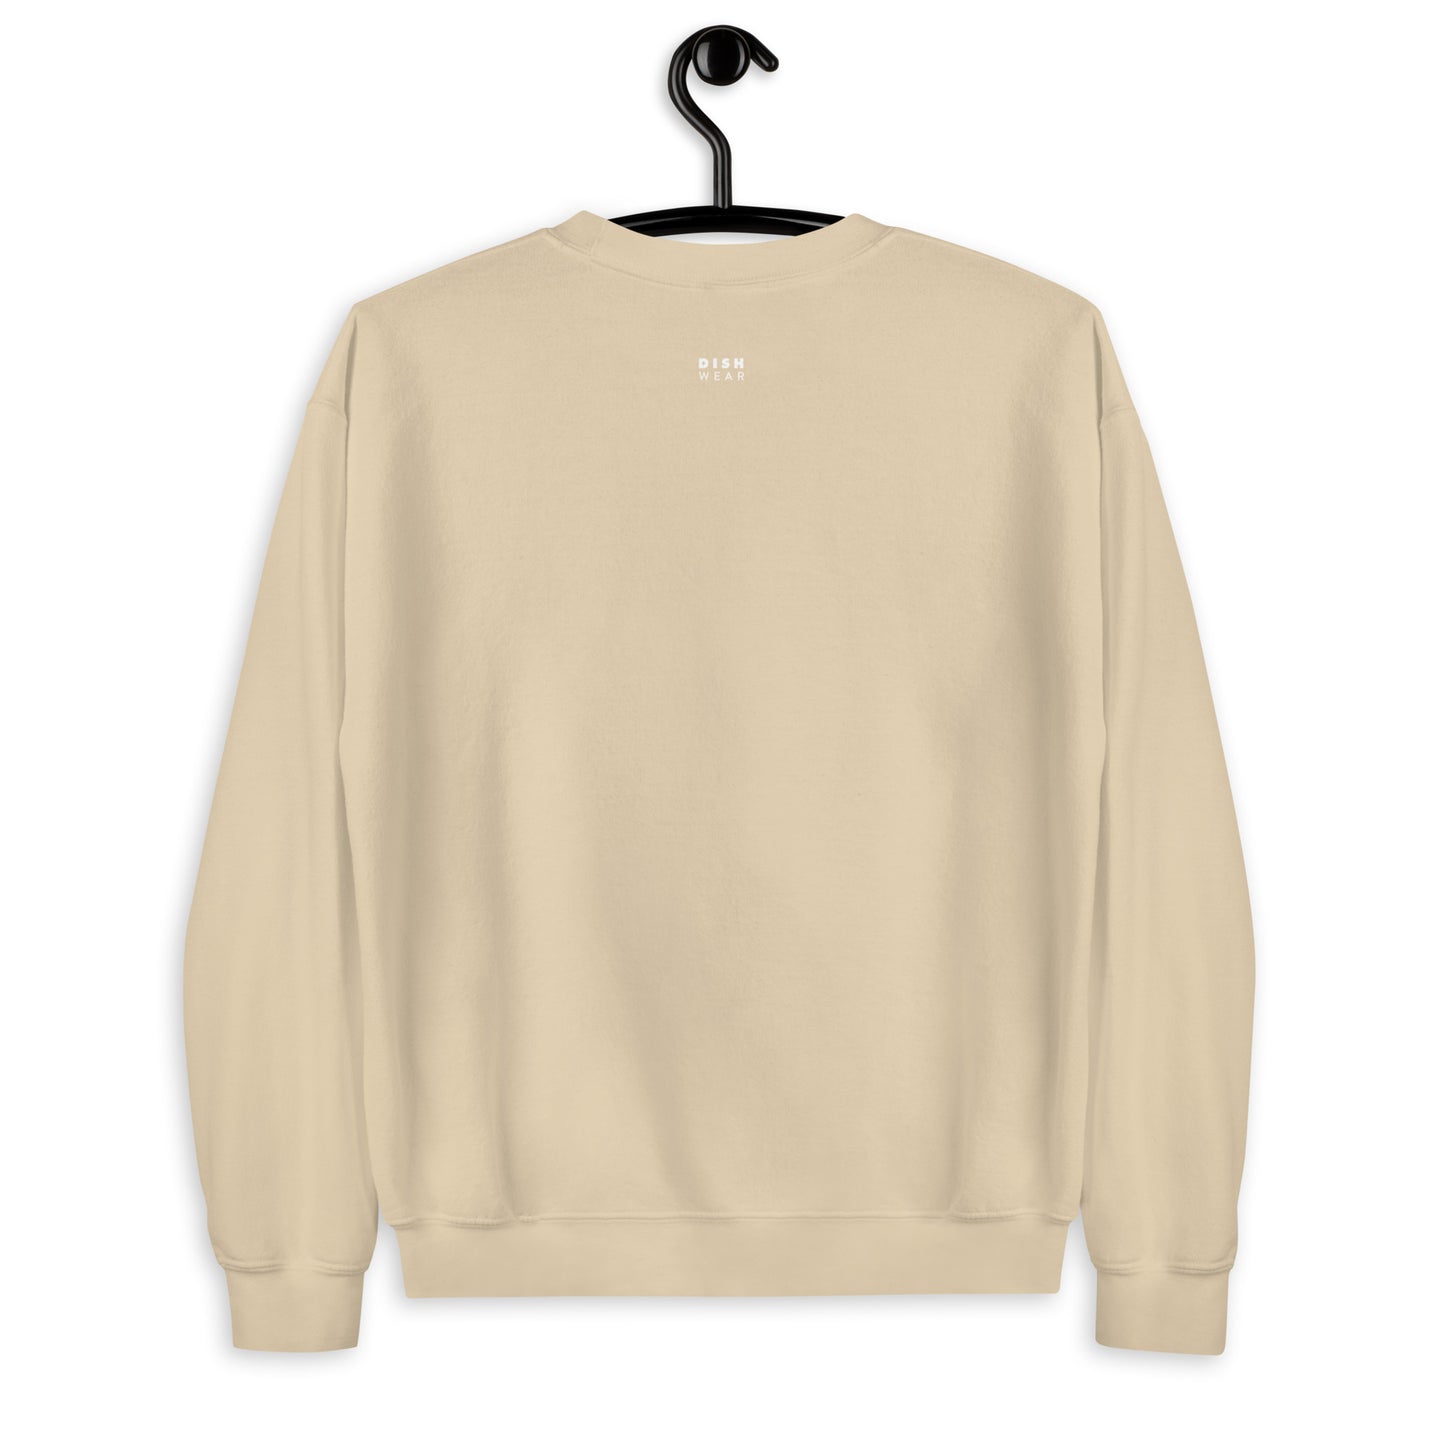 Chocolate Chips Sweatshirt - Arched Font